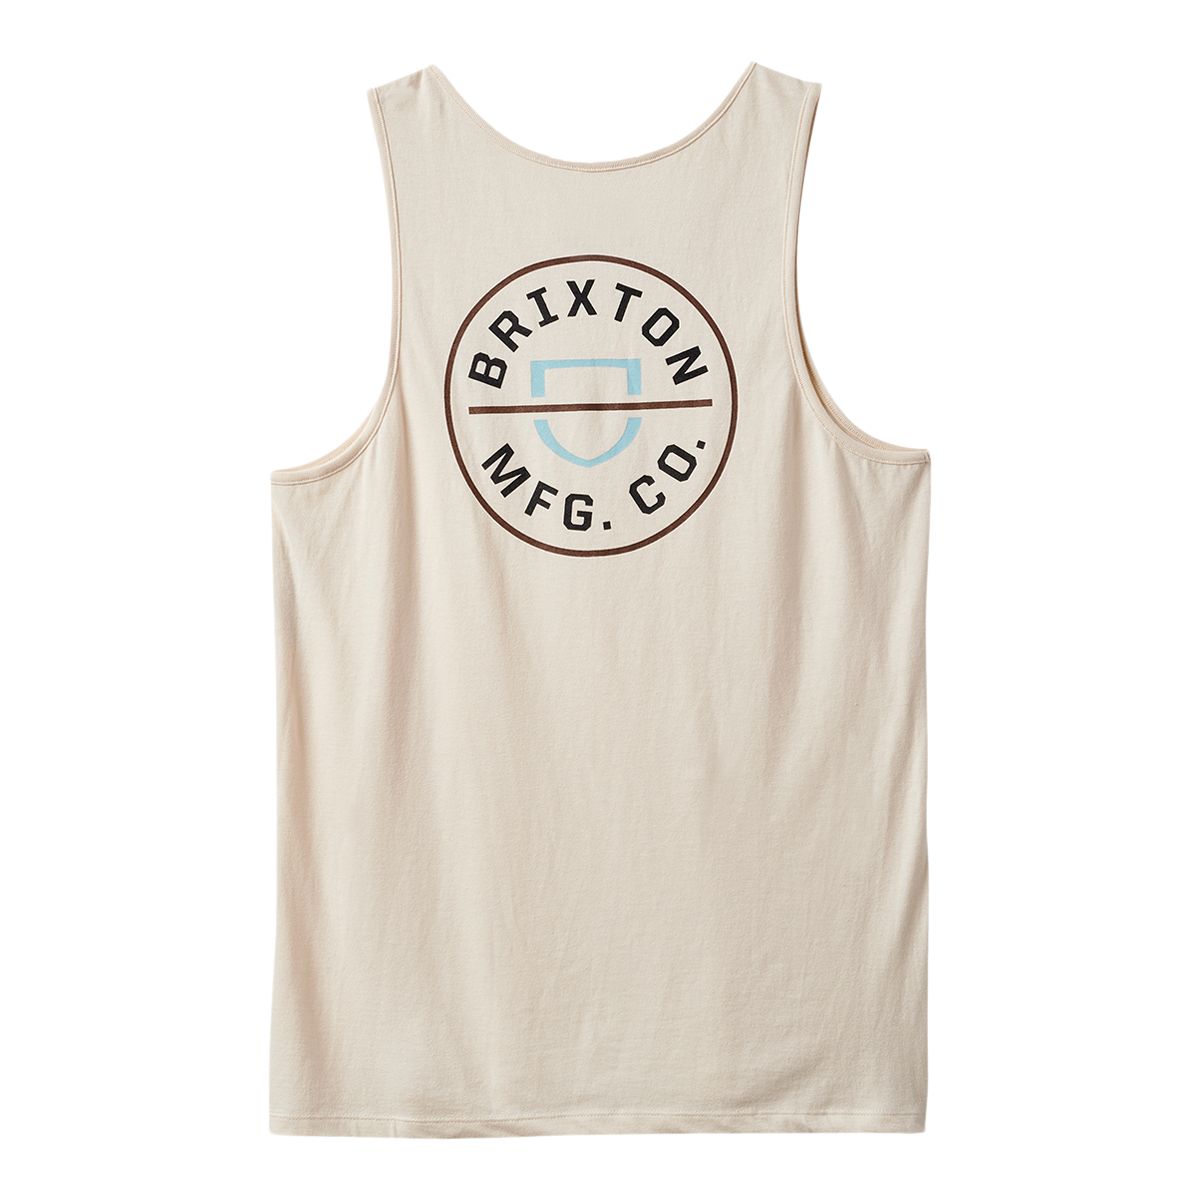 https://media-www.sportchek.ca/product/div-03-softgoods/dpt-72-casual-clothing/sdpt-01-mens/334090788/brixton-m-crest-tank-straw-q123--280b7fbb-340a-42fd-9cc9-d24cf8dc9b1d-jpgrendition.jpg?imdensity=1&imwidth=1244&impolicy=mZoom